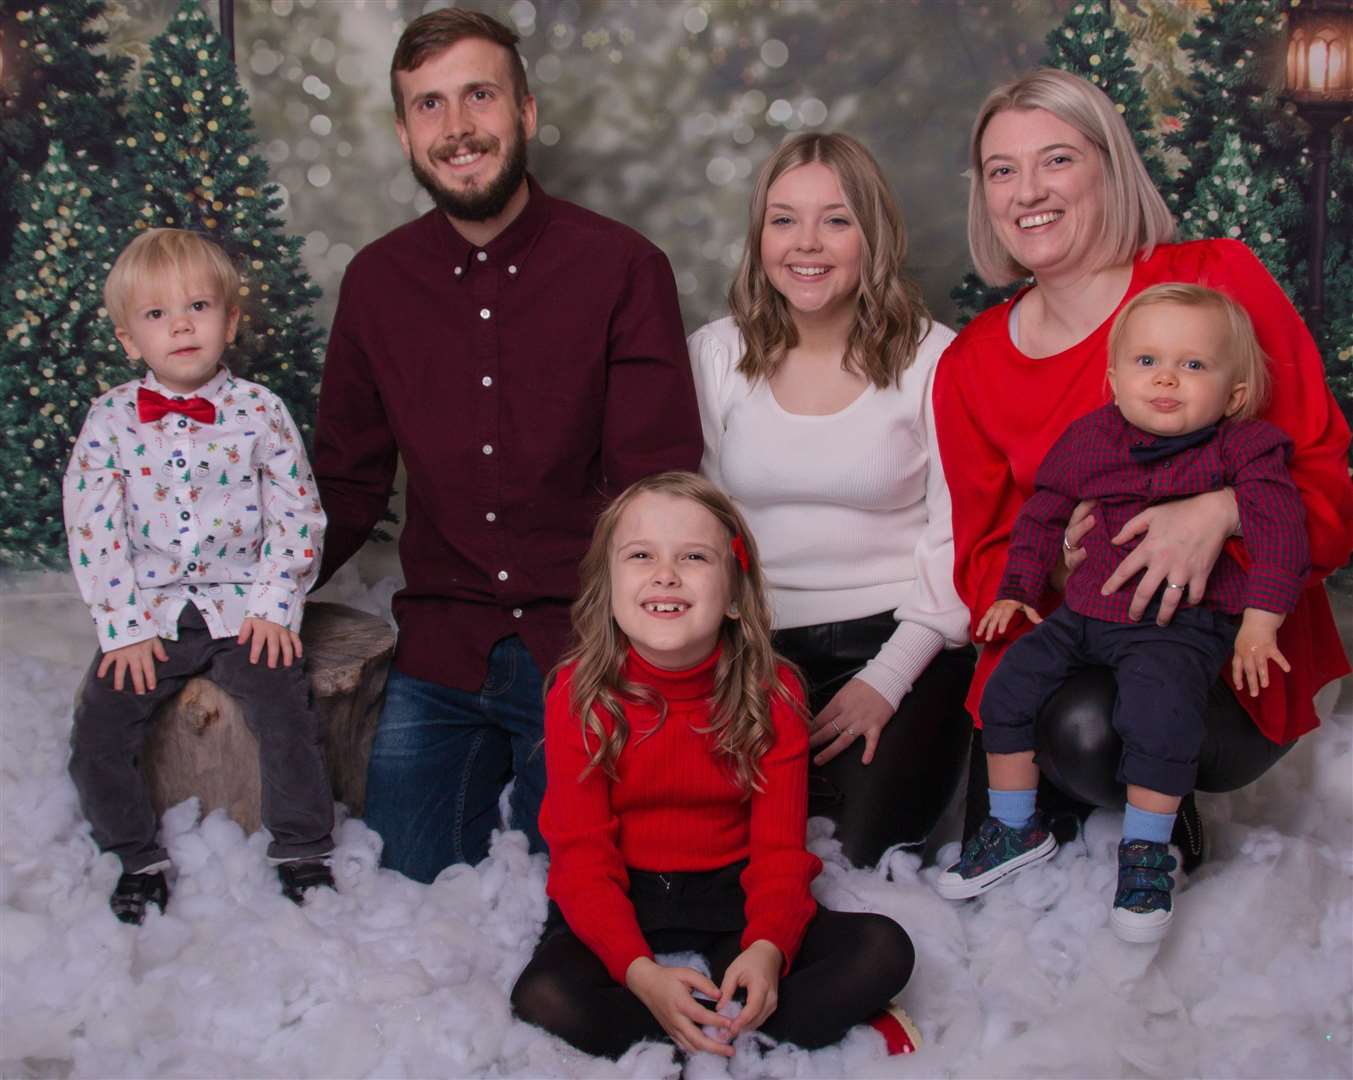 A Christmas picture with all the family.